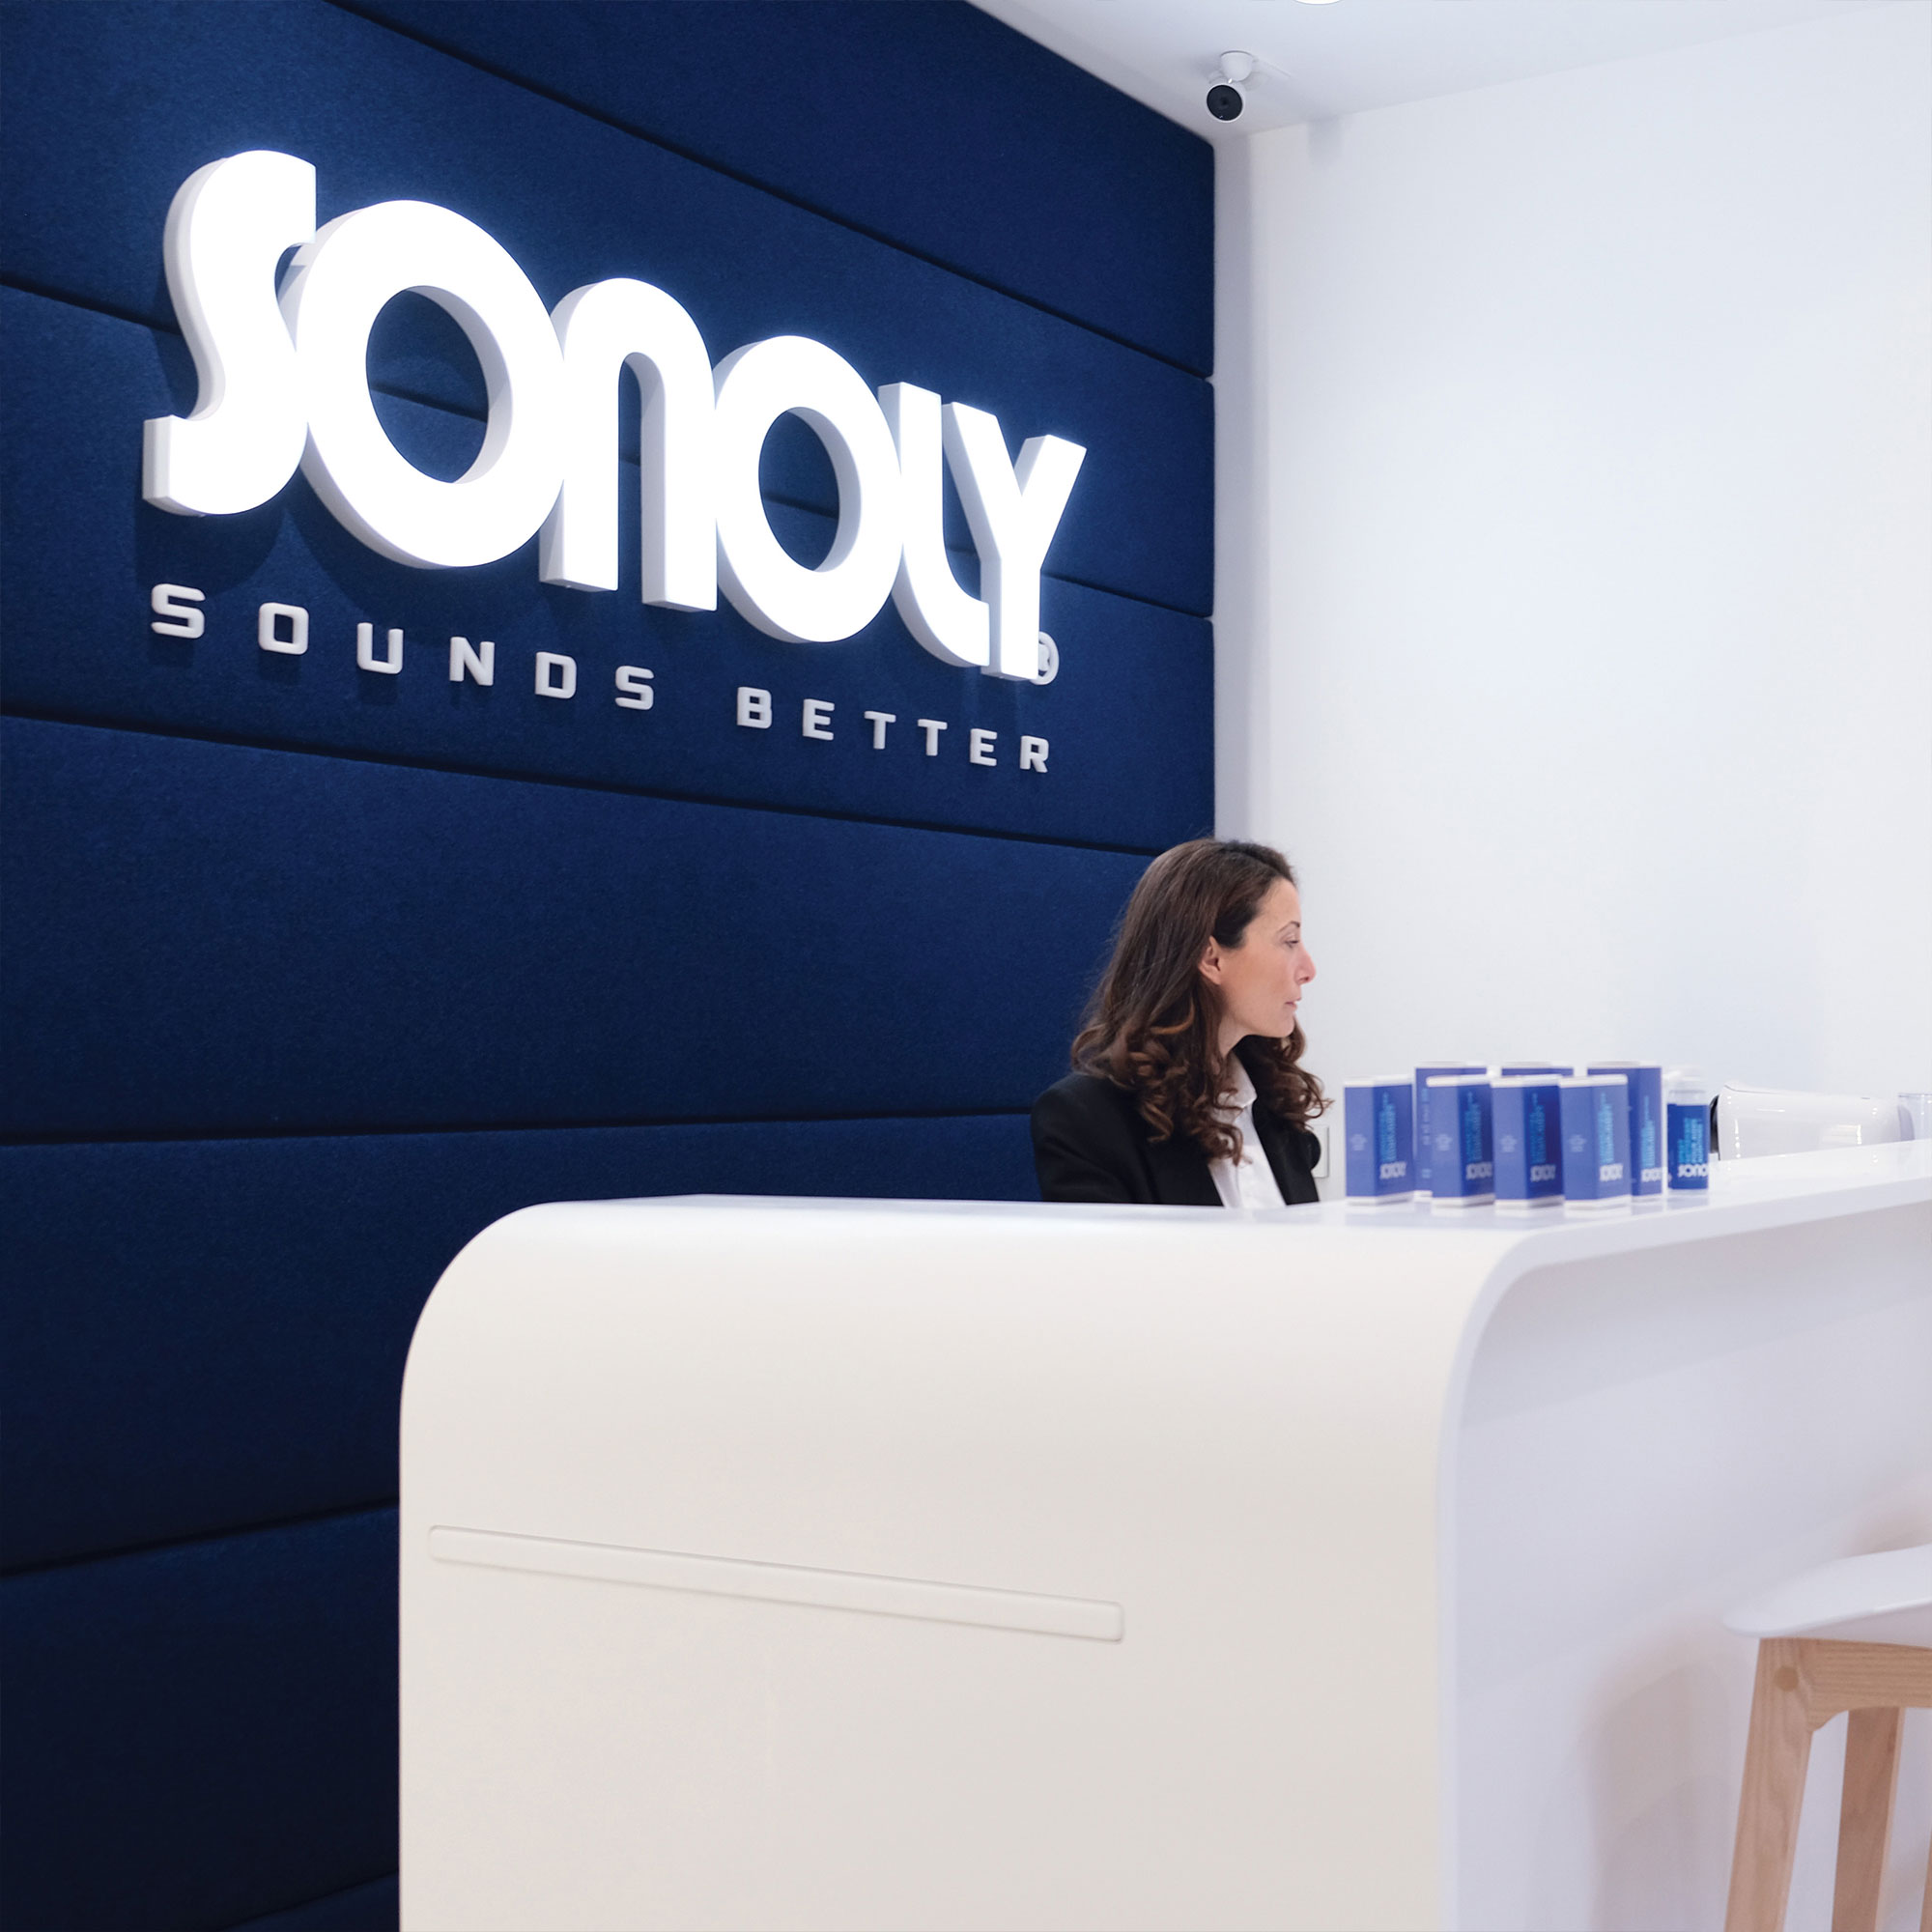 Sonoly-sounds-better-audiologistes-casques-hd-appareils-auditifs-protection-auditive-Photos-magasin-SONOLY-Clichy-IMAGES-02